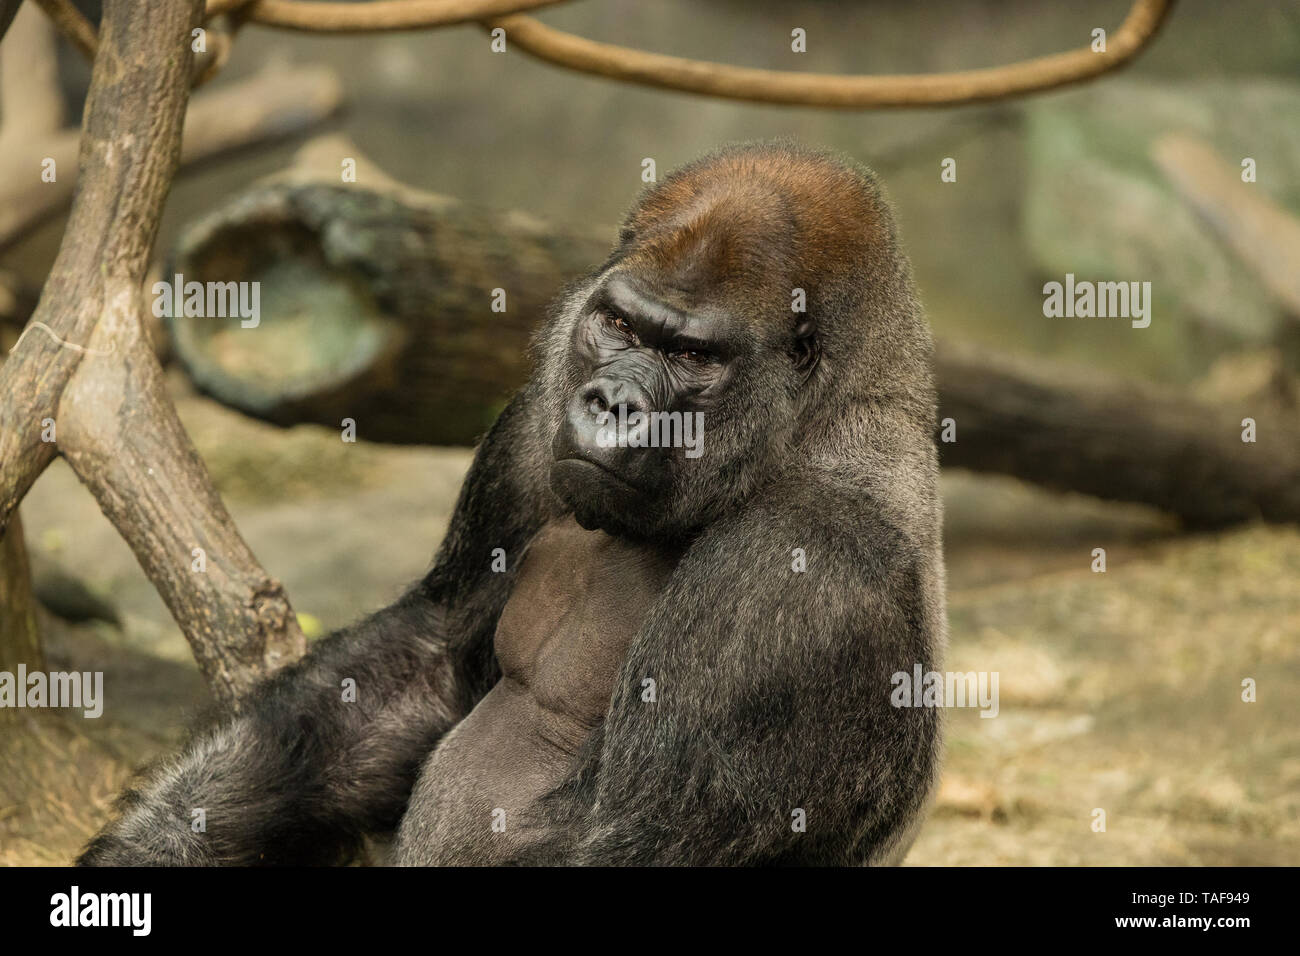 A large silverback gorilla looking towards the camera. Stock Photo